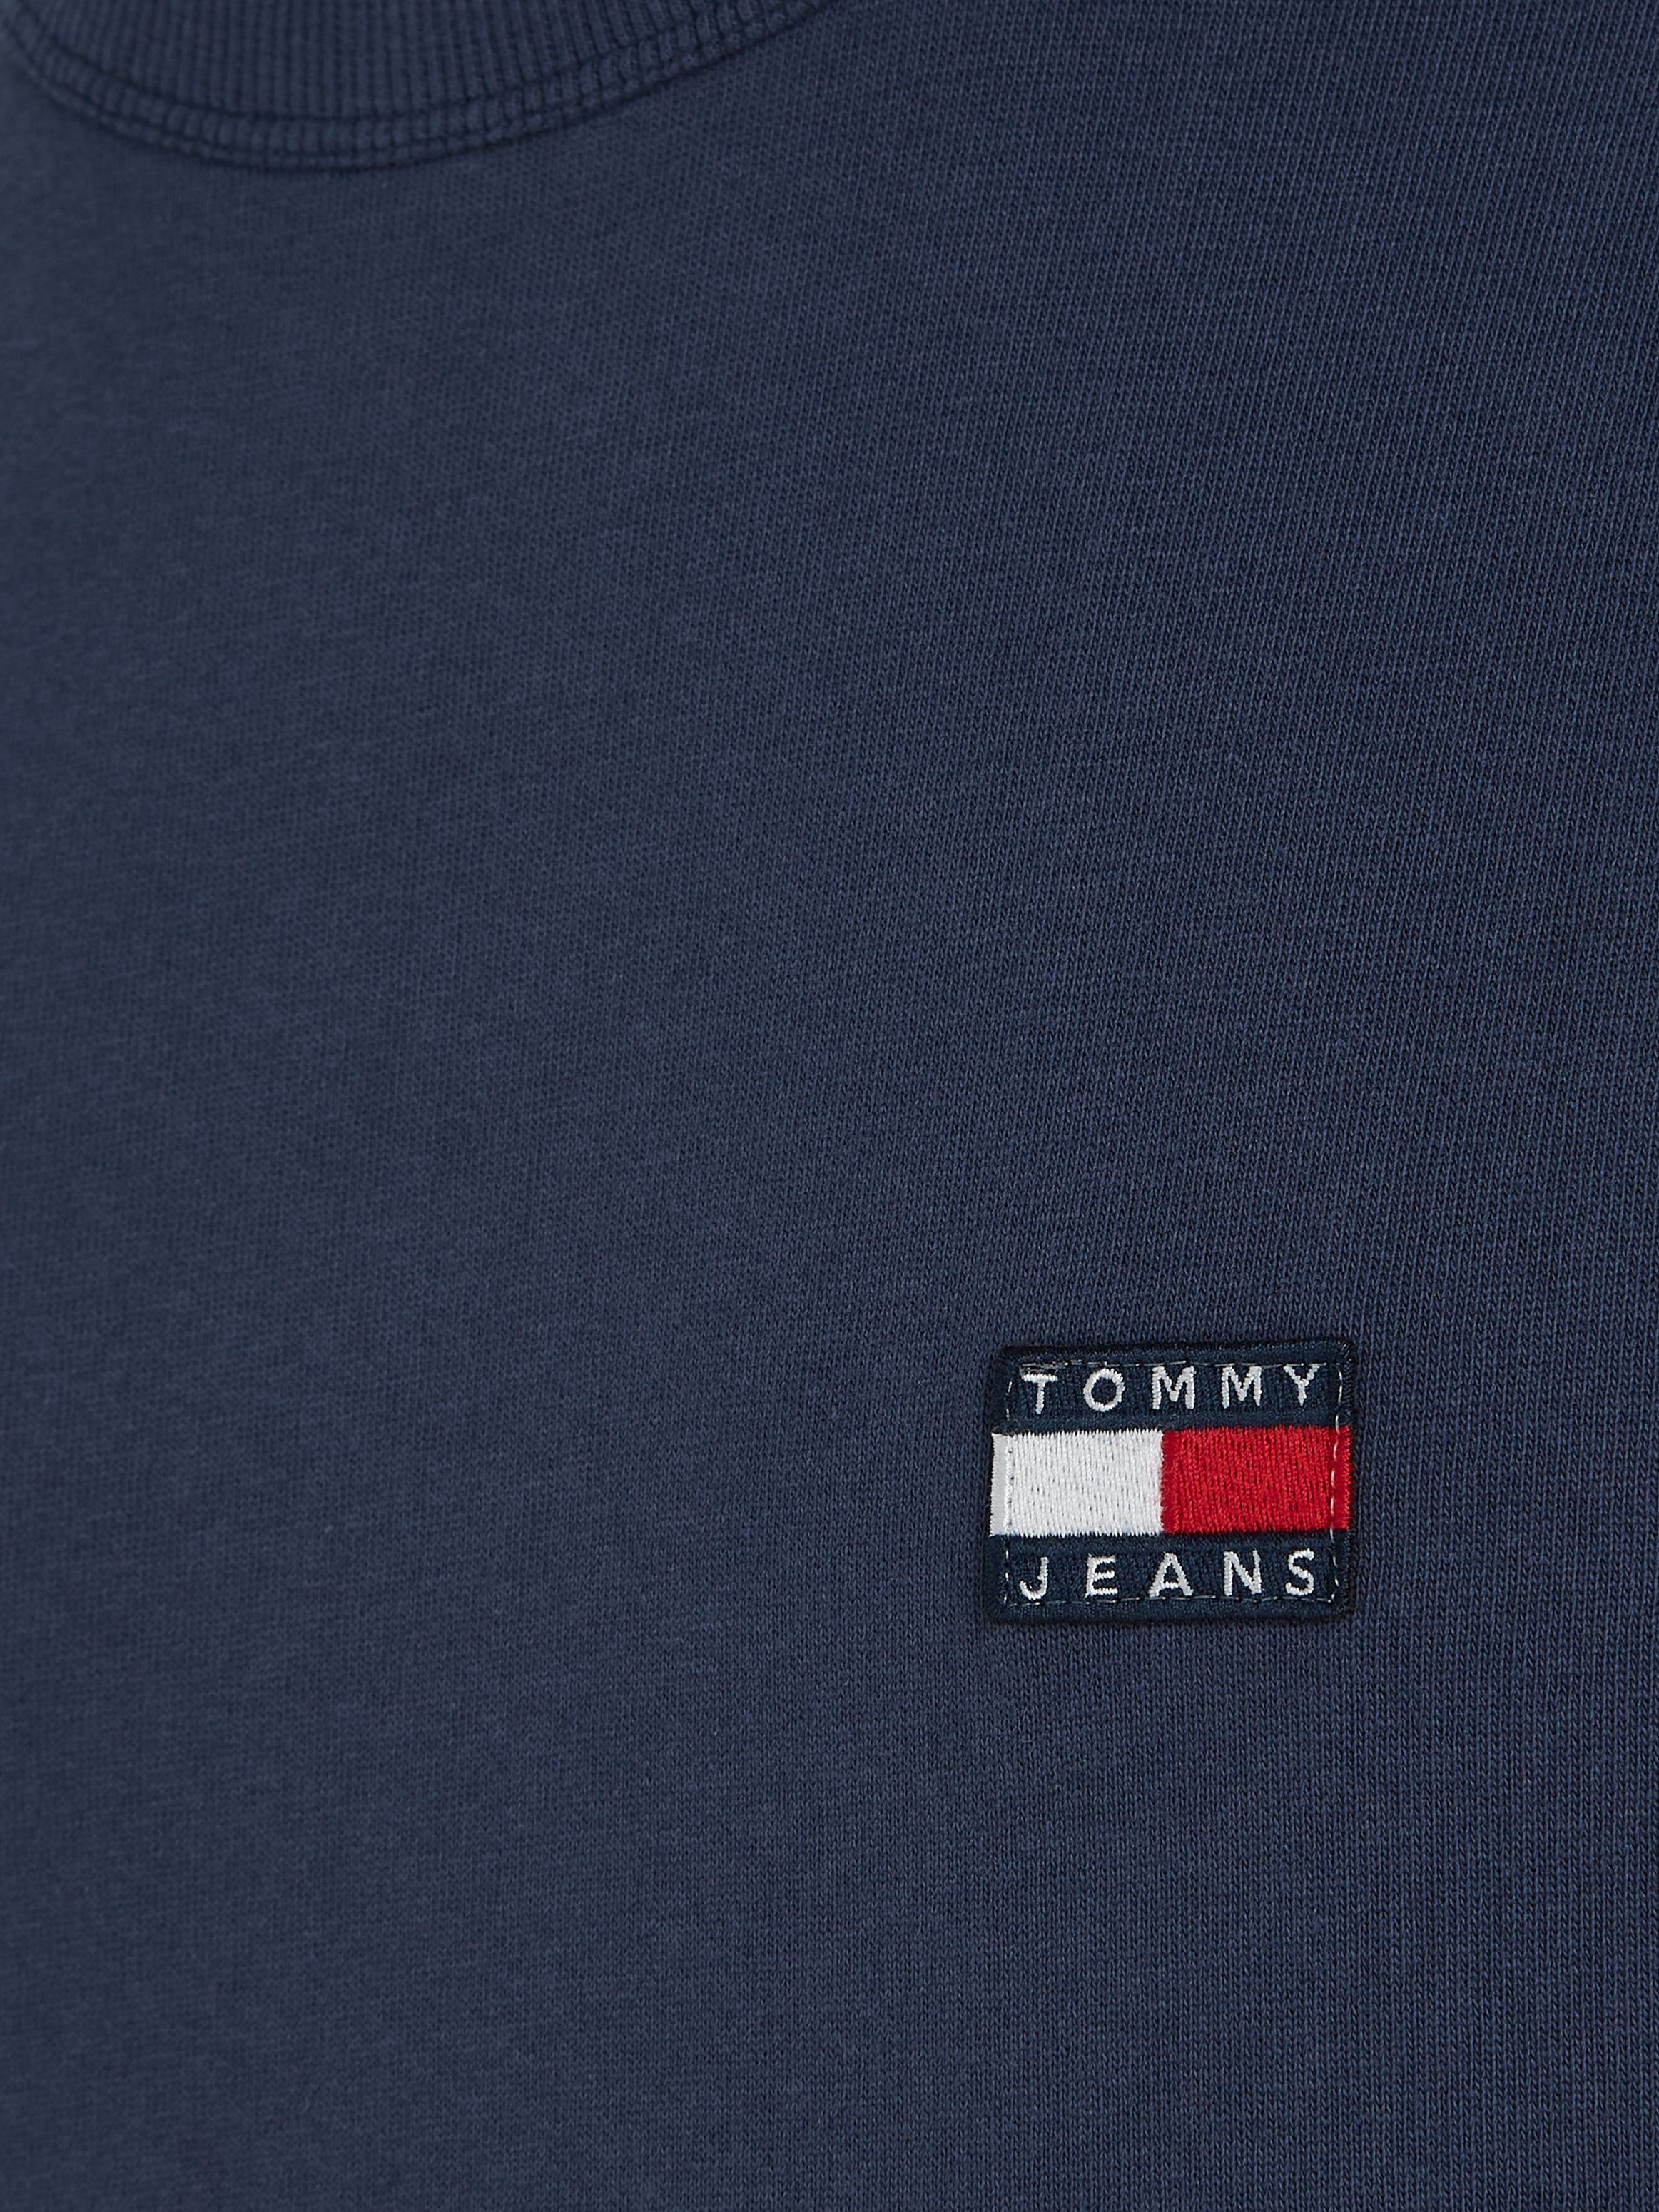 BADGE TEE Jeans TJM T-Shirt Twilight TOMMY Navy Tommy XS CLSC